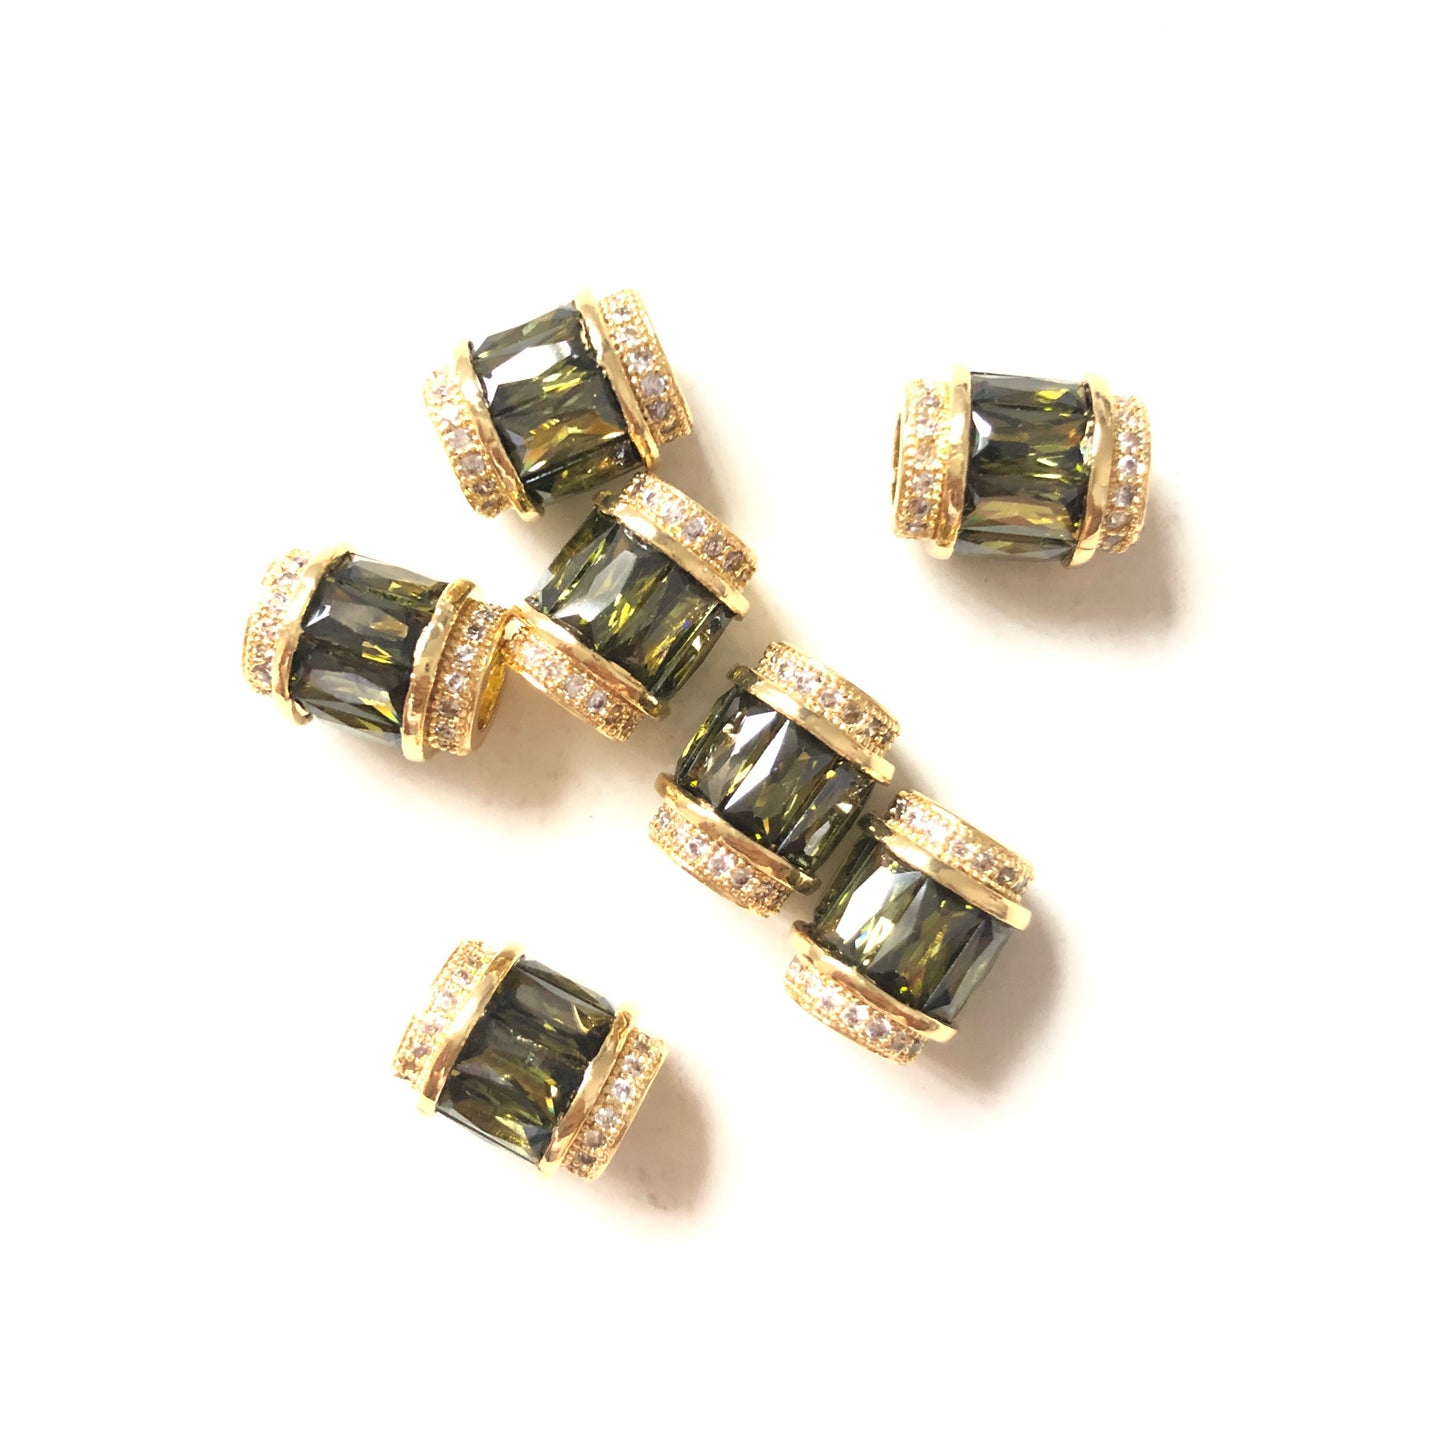 10pcs/lot 12*10mm Green CZ Paved Big Hole Spacers Gold CZ Paved Spacers Big Hole Beads New Spacers Arrivals Charms Beads Beyond